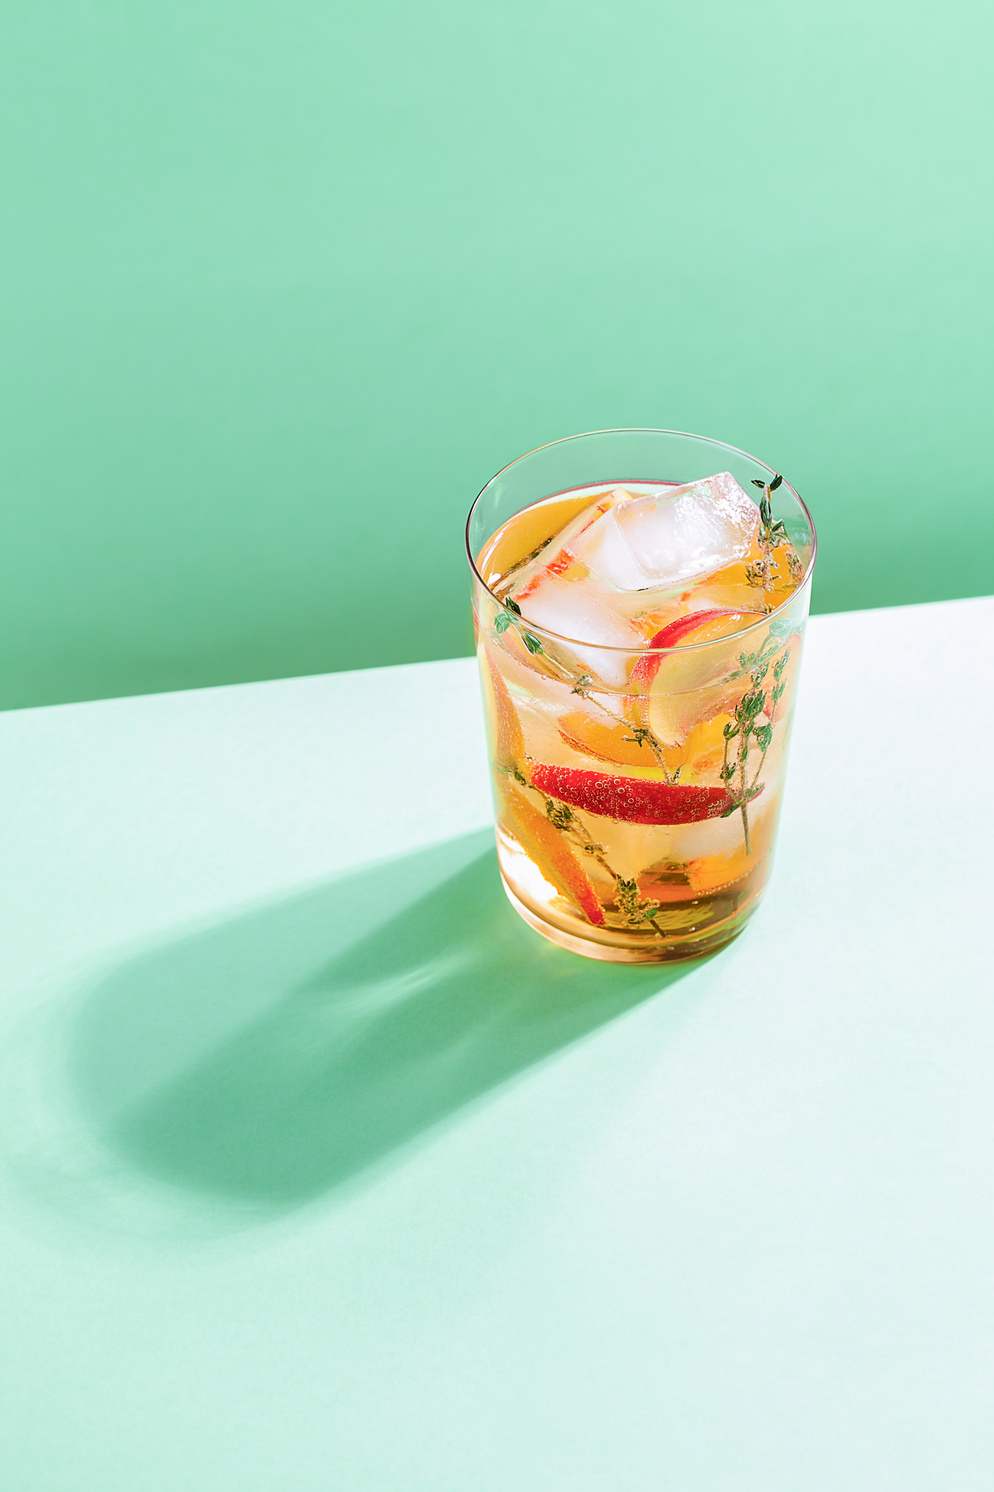 Sparkling cold brew peach tea with thyme in glass on green paper background